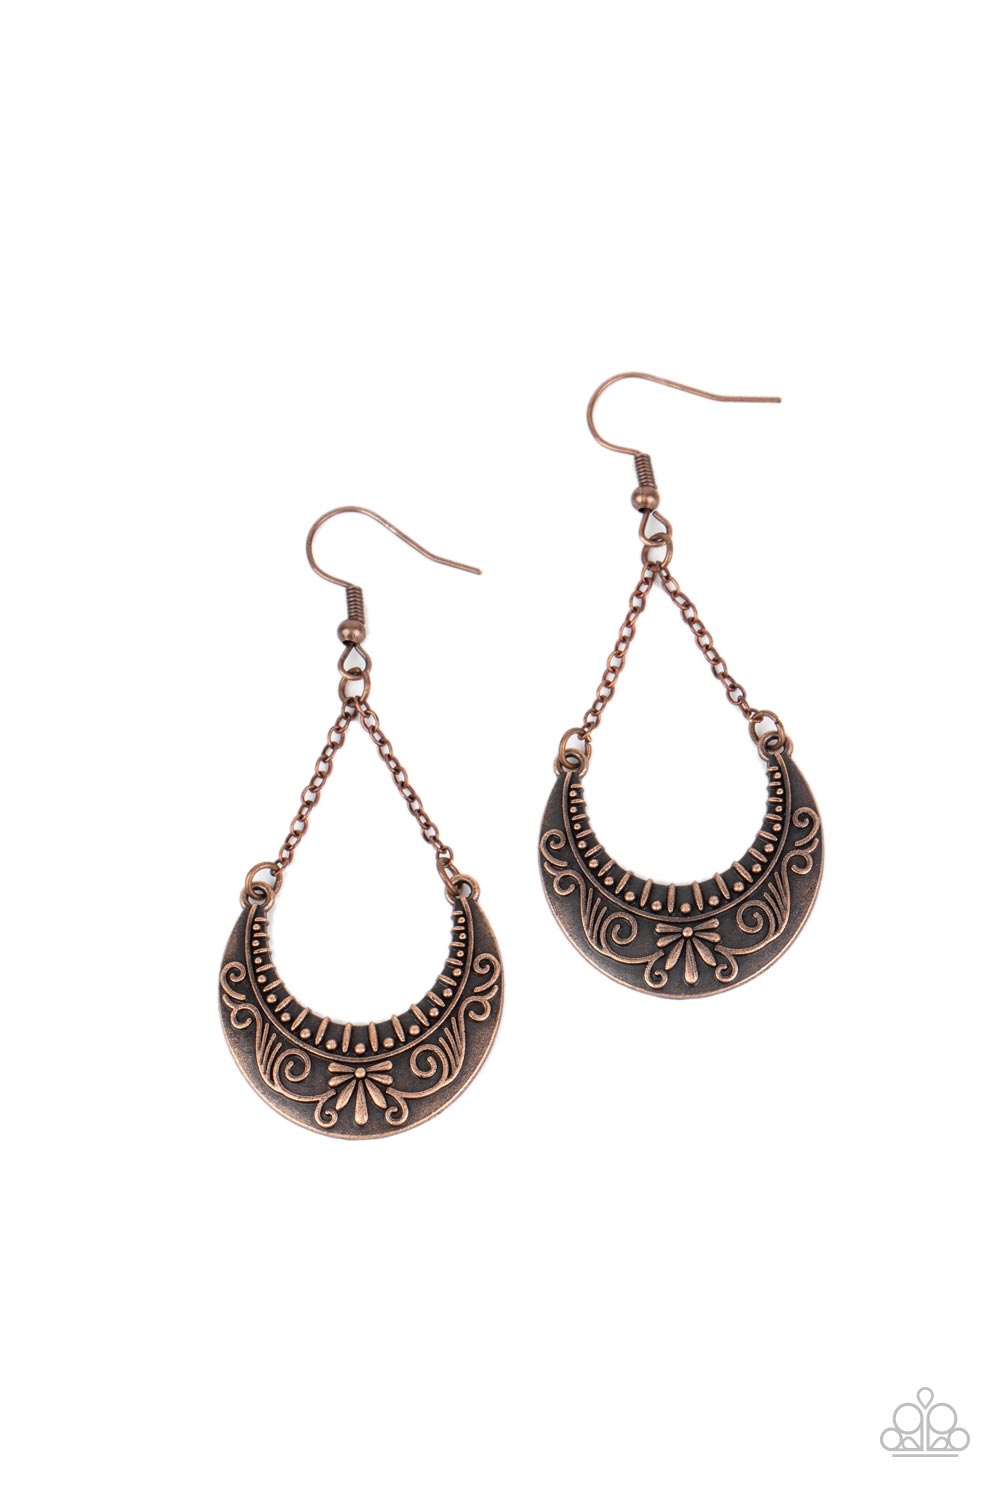 All in the PASTURE - Copper Flowery Filigree Half Moon Paparazzi Earrings